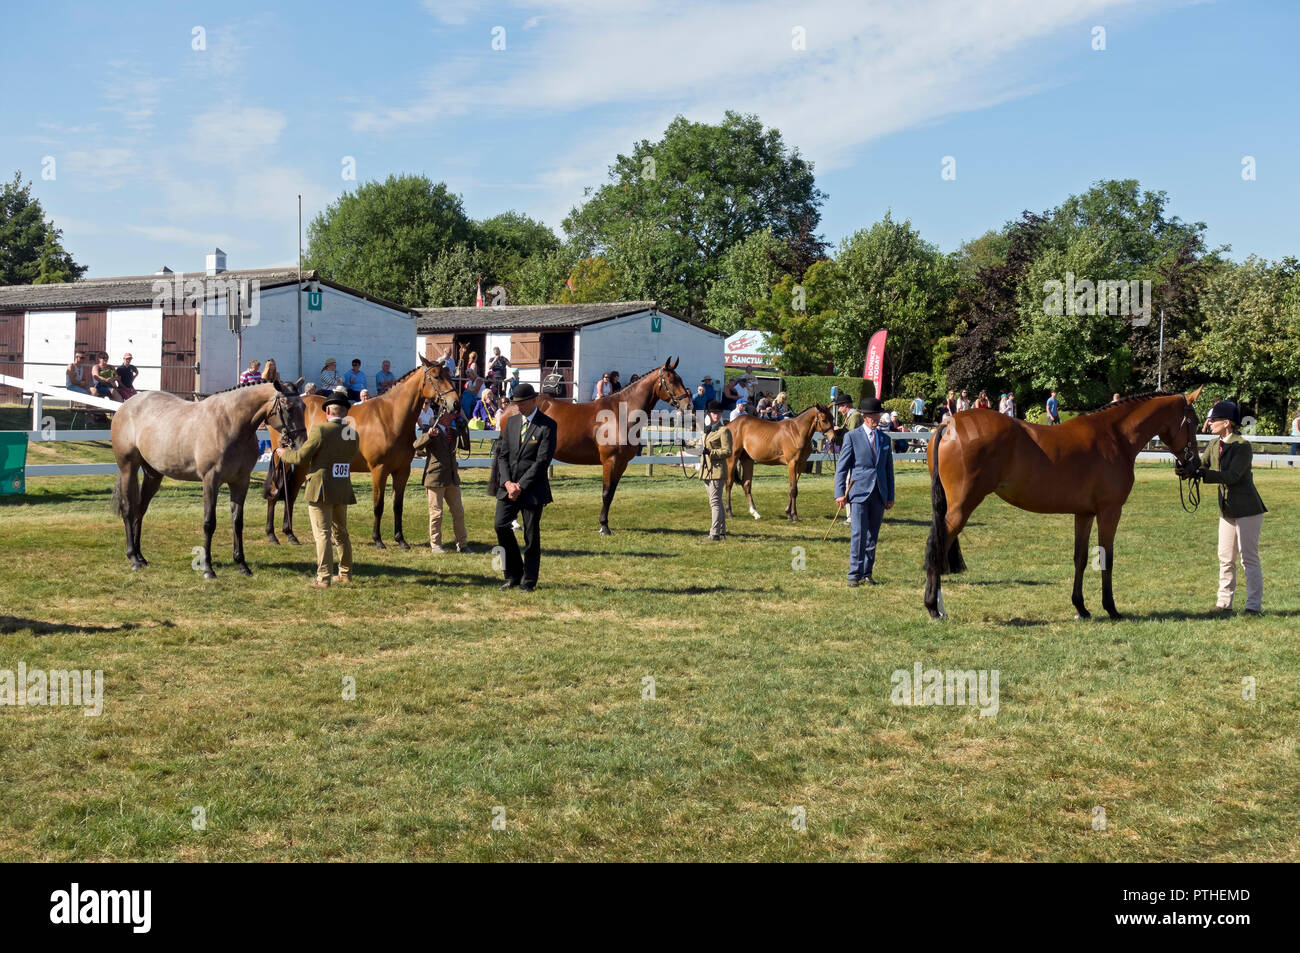 Horses horse being judged at the Great Yorkshire Show Harrogate North Yorkshire England UK United Kingdom GB Great Britain Stock Photo